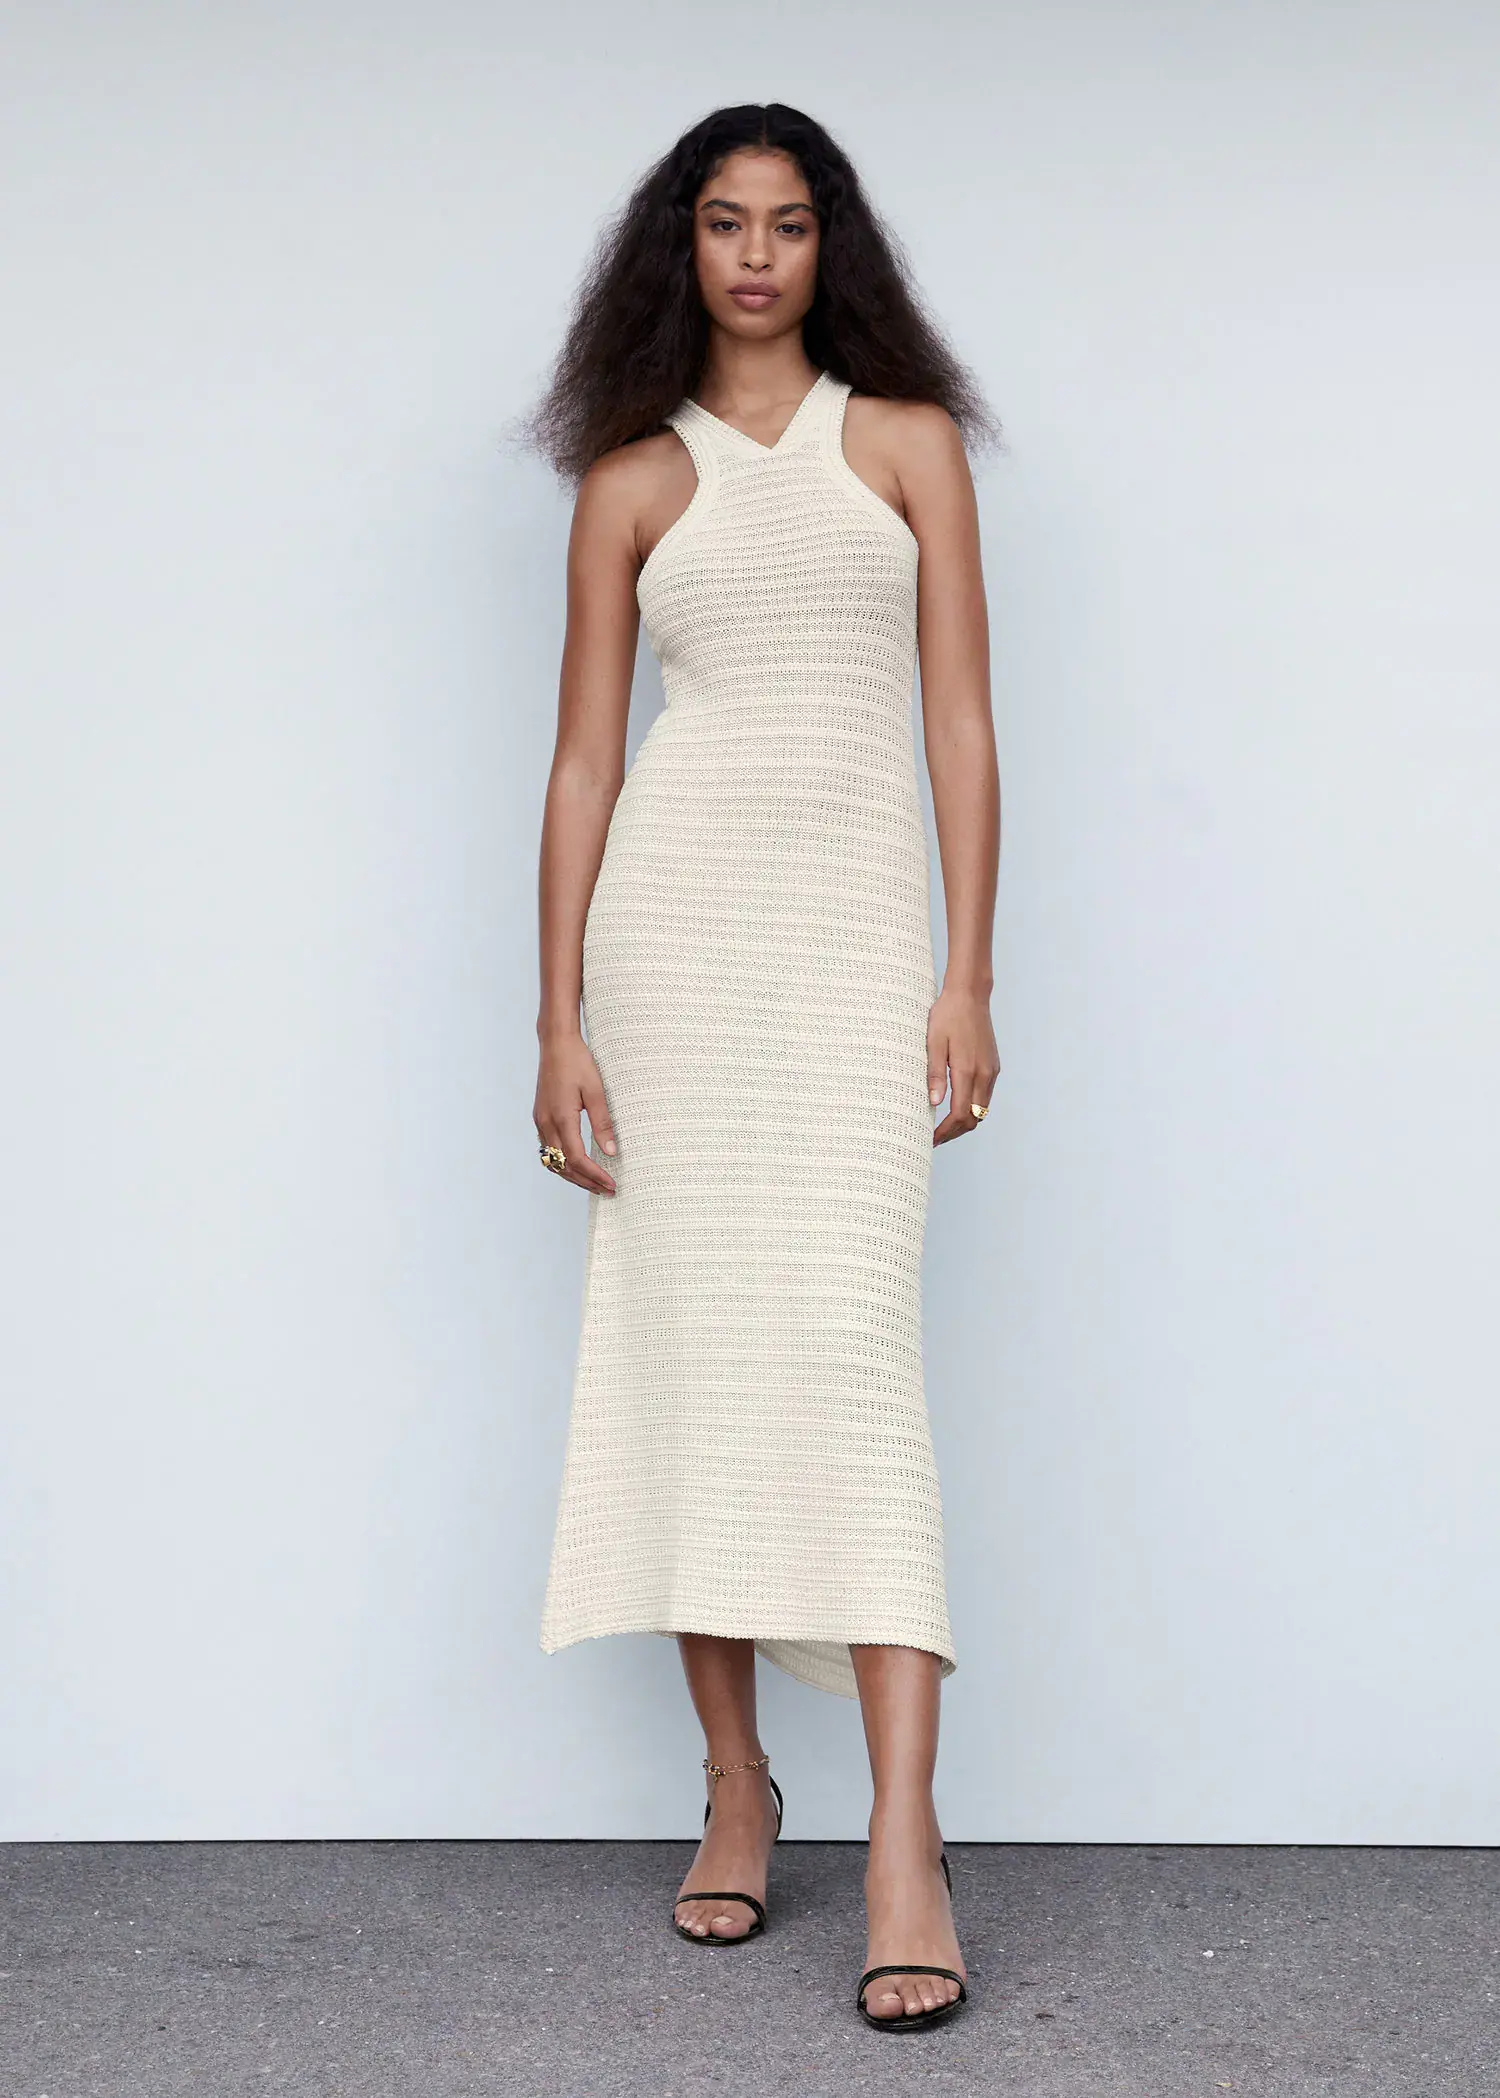 Mango Halter-neck crochet dress. a woman in a white dress standing in front of a white wall. 